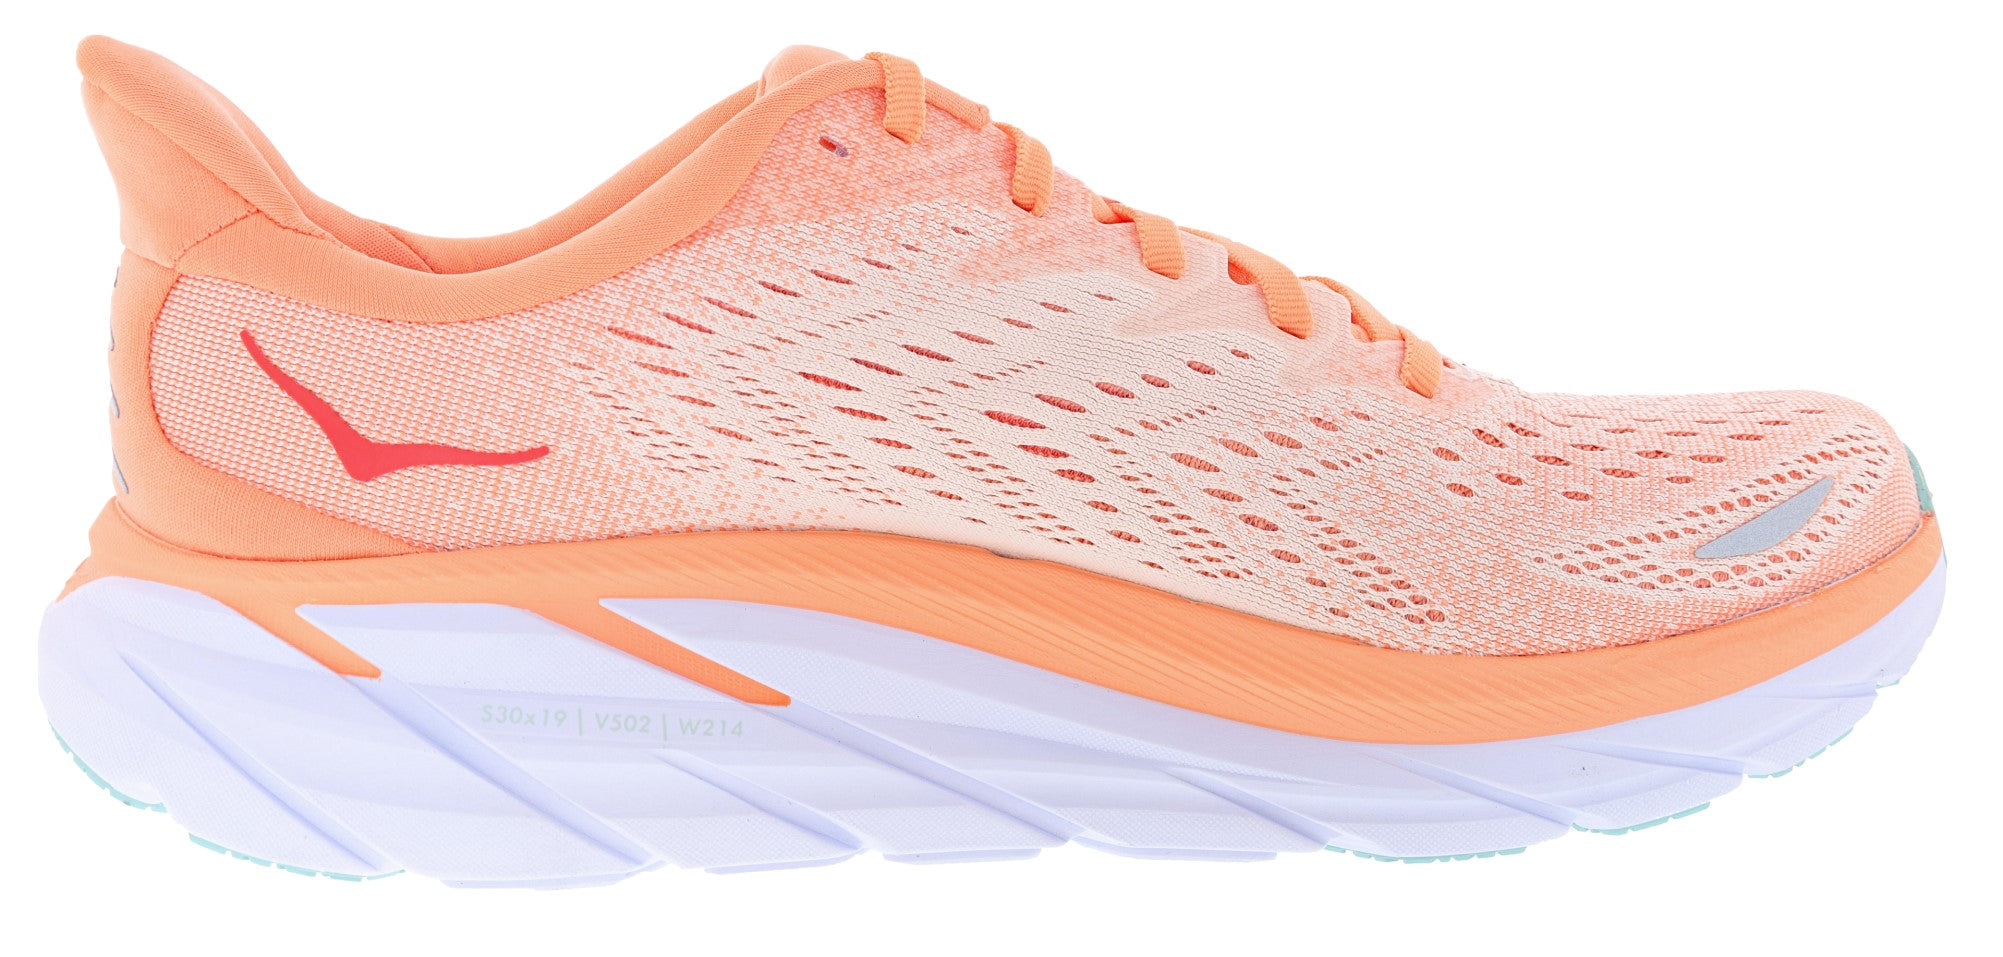 Hoka Clifton 8 Shoes Recommended by Podiatrist - Women's | Shoe 